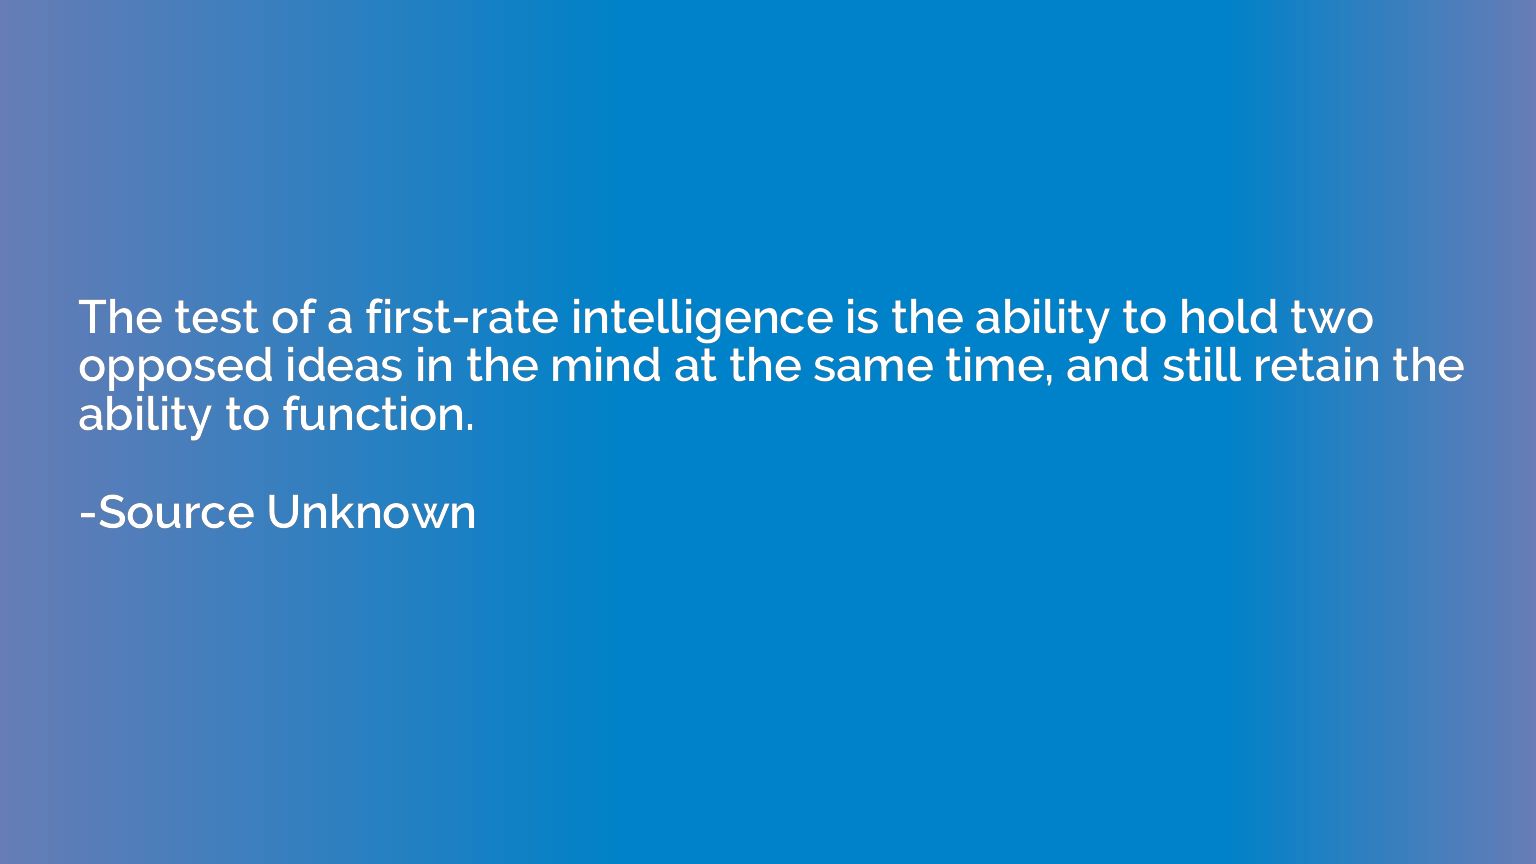 The test of a first-rate intelligence is the ability to hold